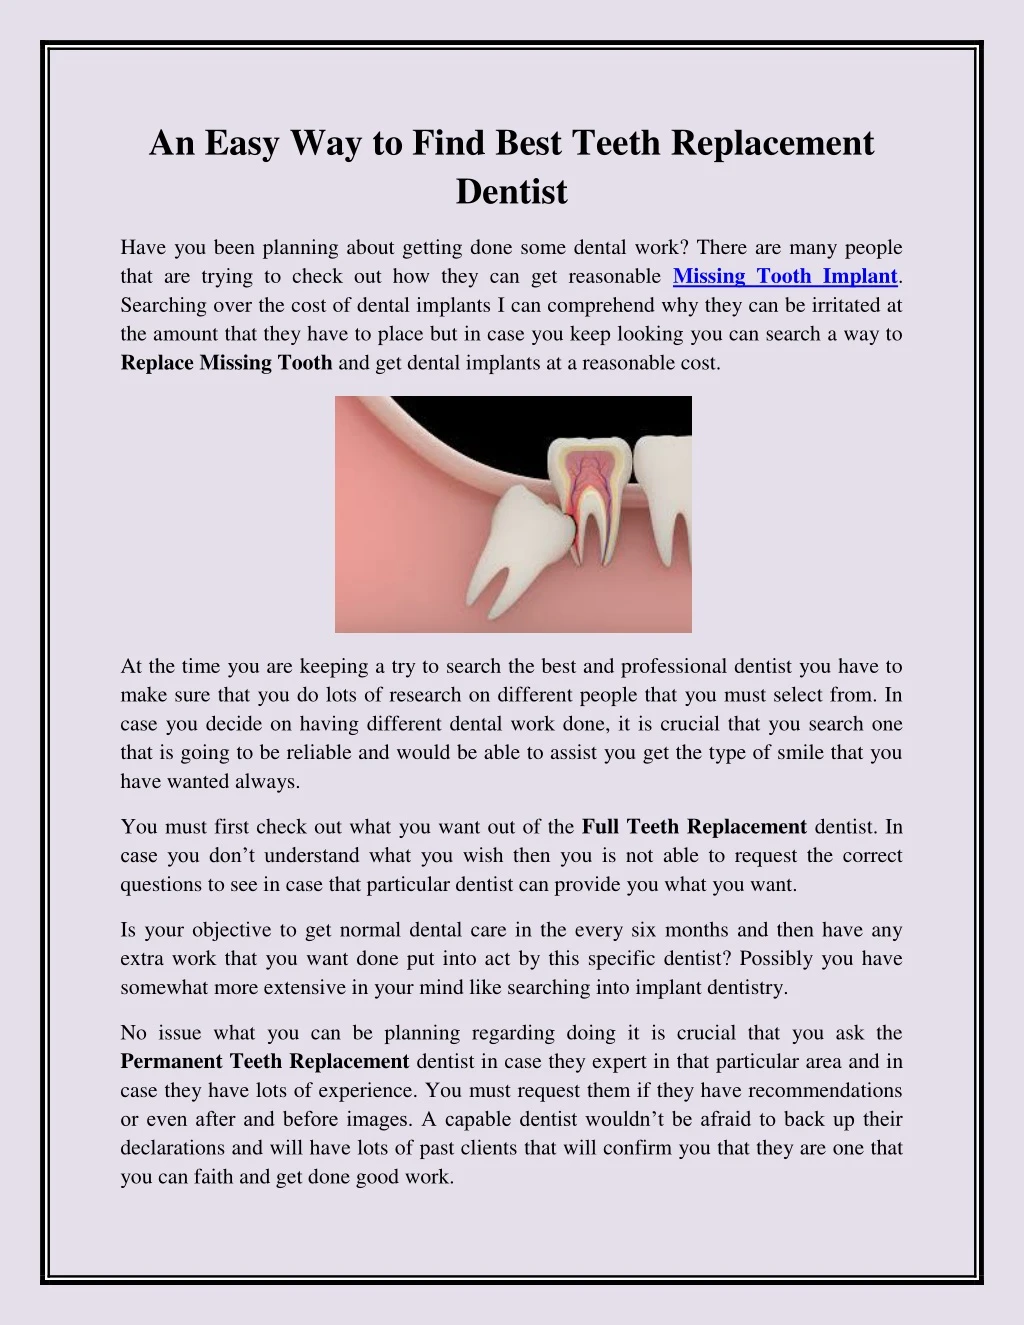 an easy way to find best teeth replacement dentist